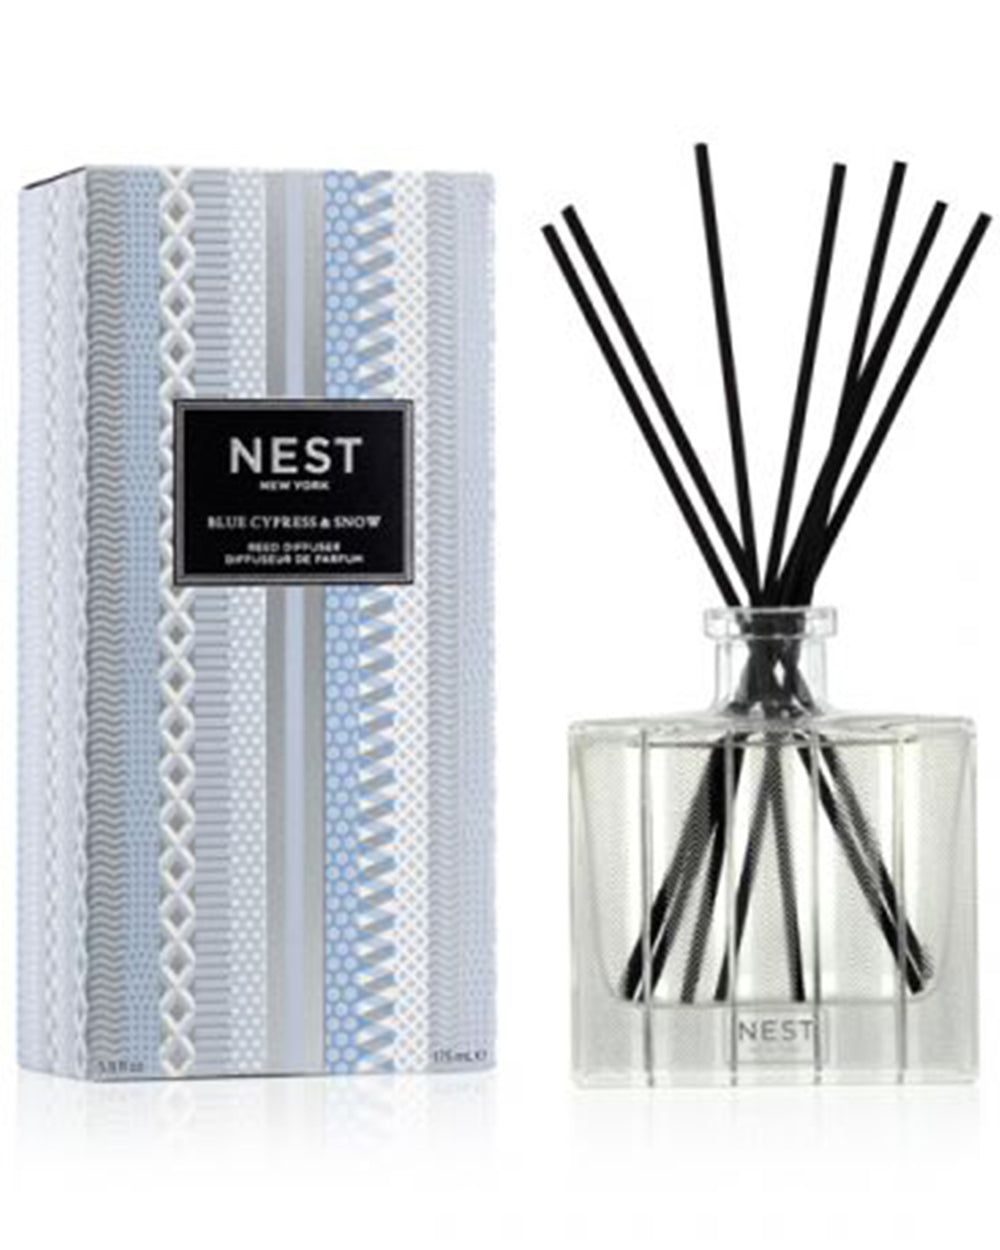 Blue Cypress and Snow Reed Diffuser